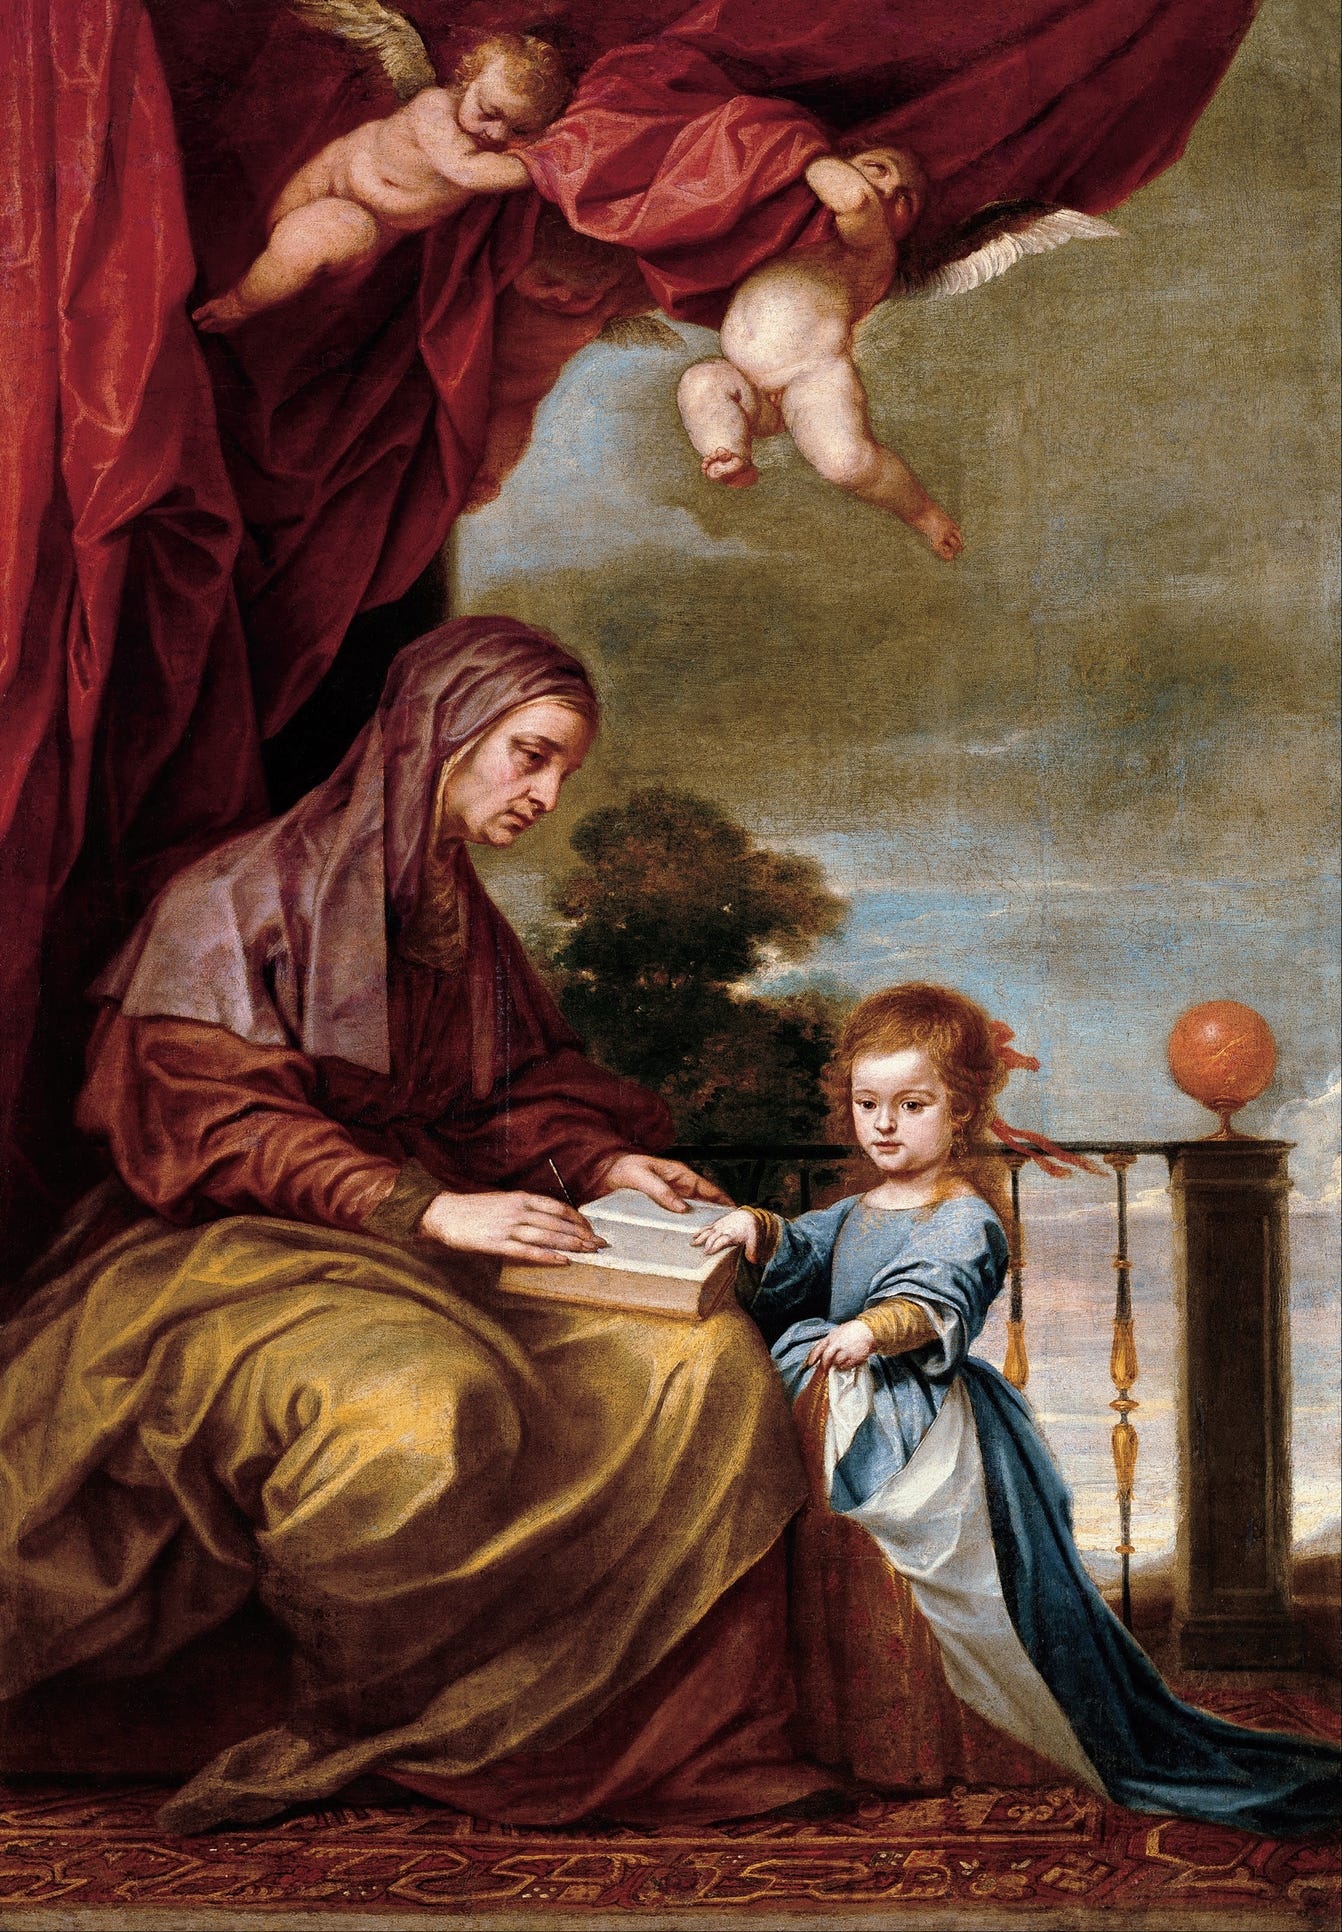 The Education of the Virgin Mary (between 1601 and 1667) by Alonso Cano (Spanish, 1601-1667)